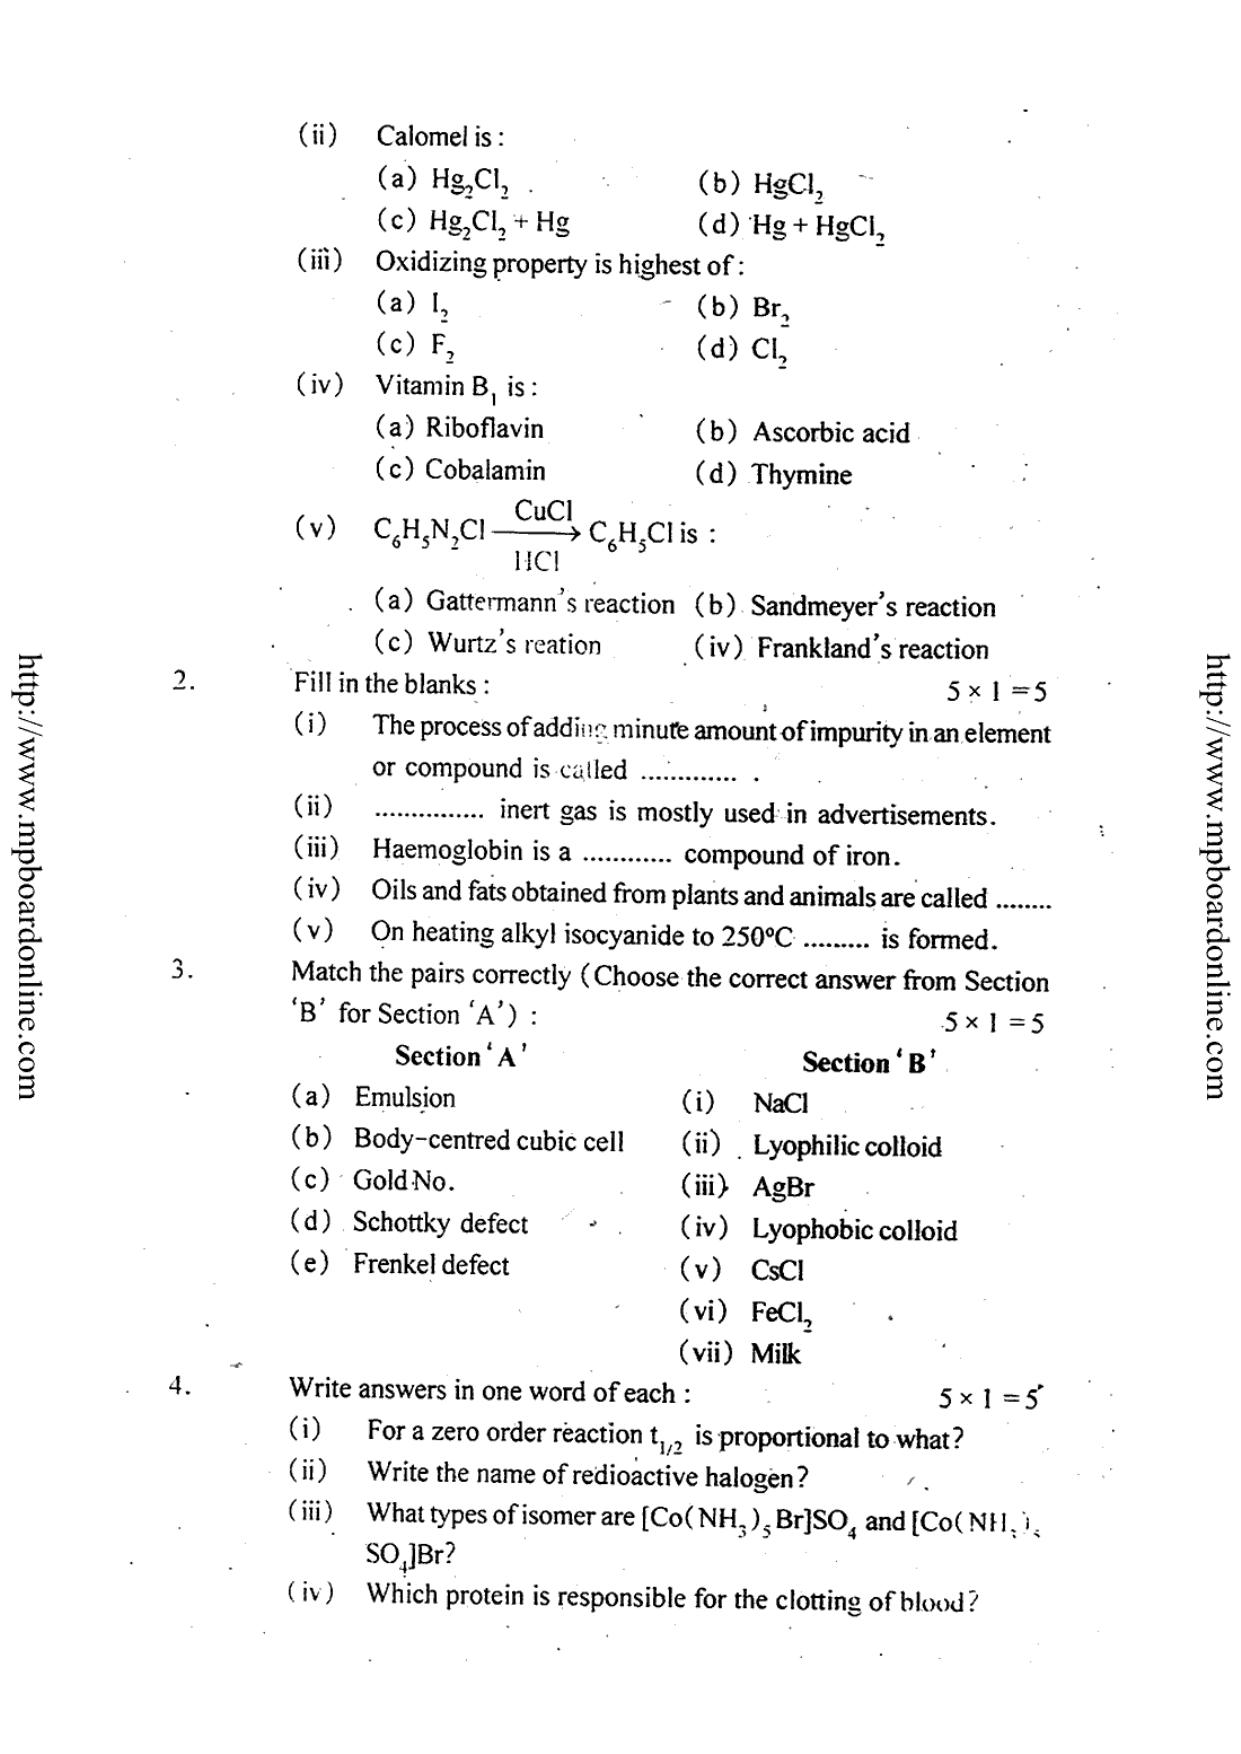 MP Board Class 12 Chemistry (English Medium) 2014 Question Paper - Page 2